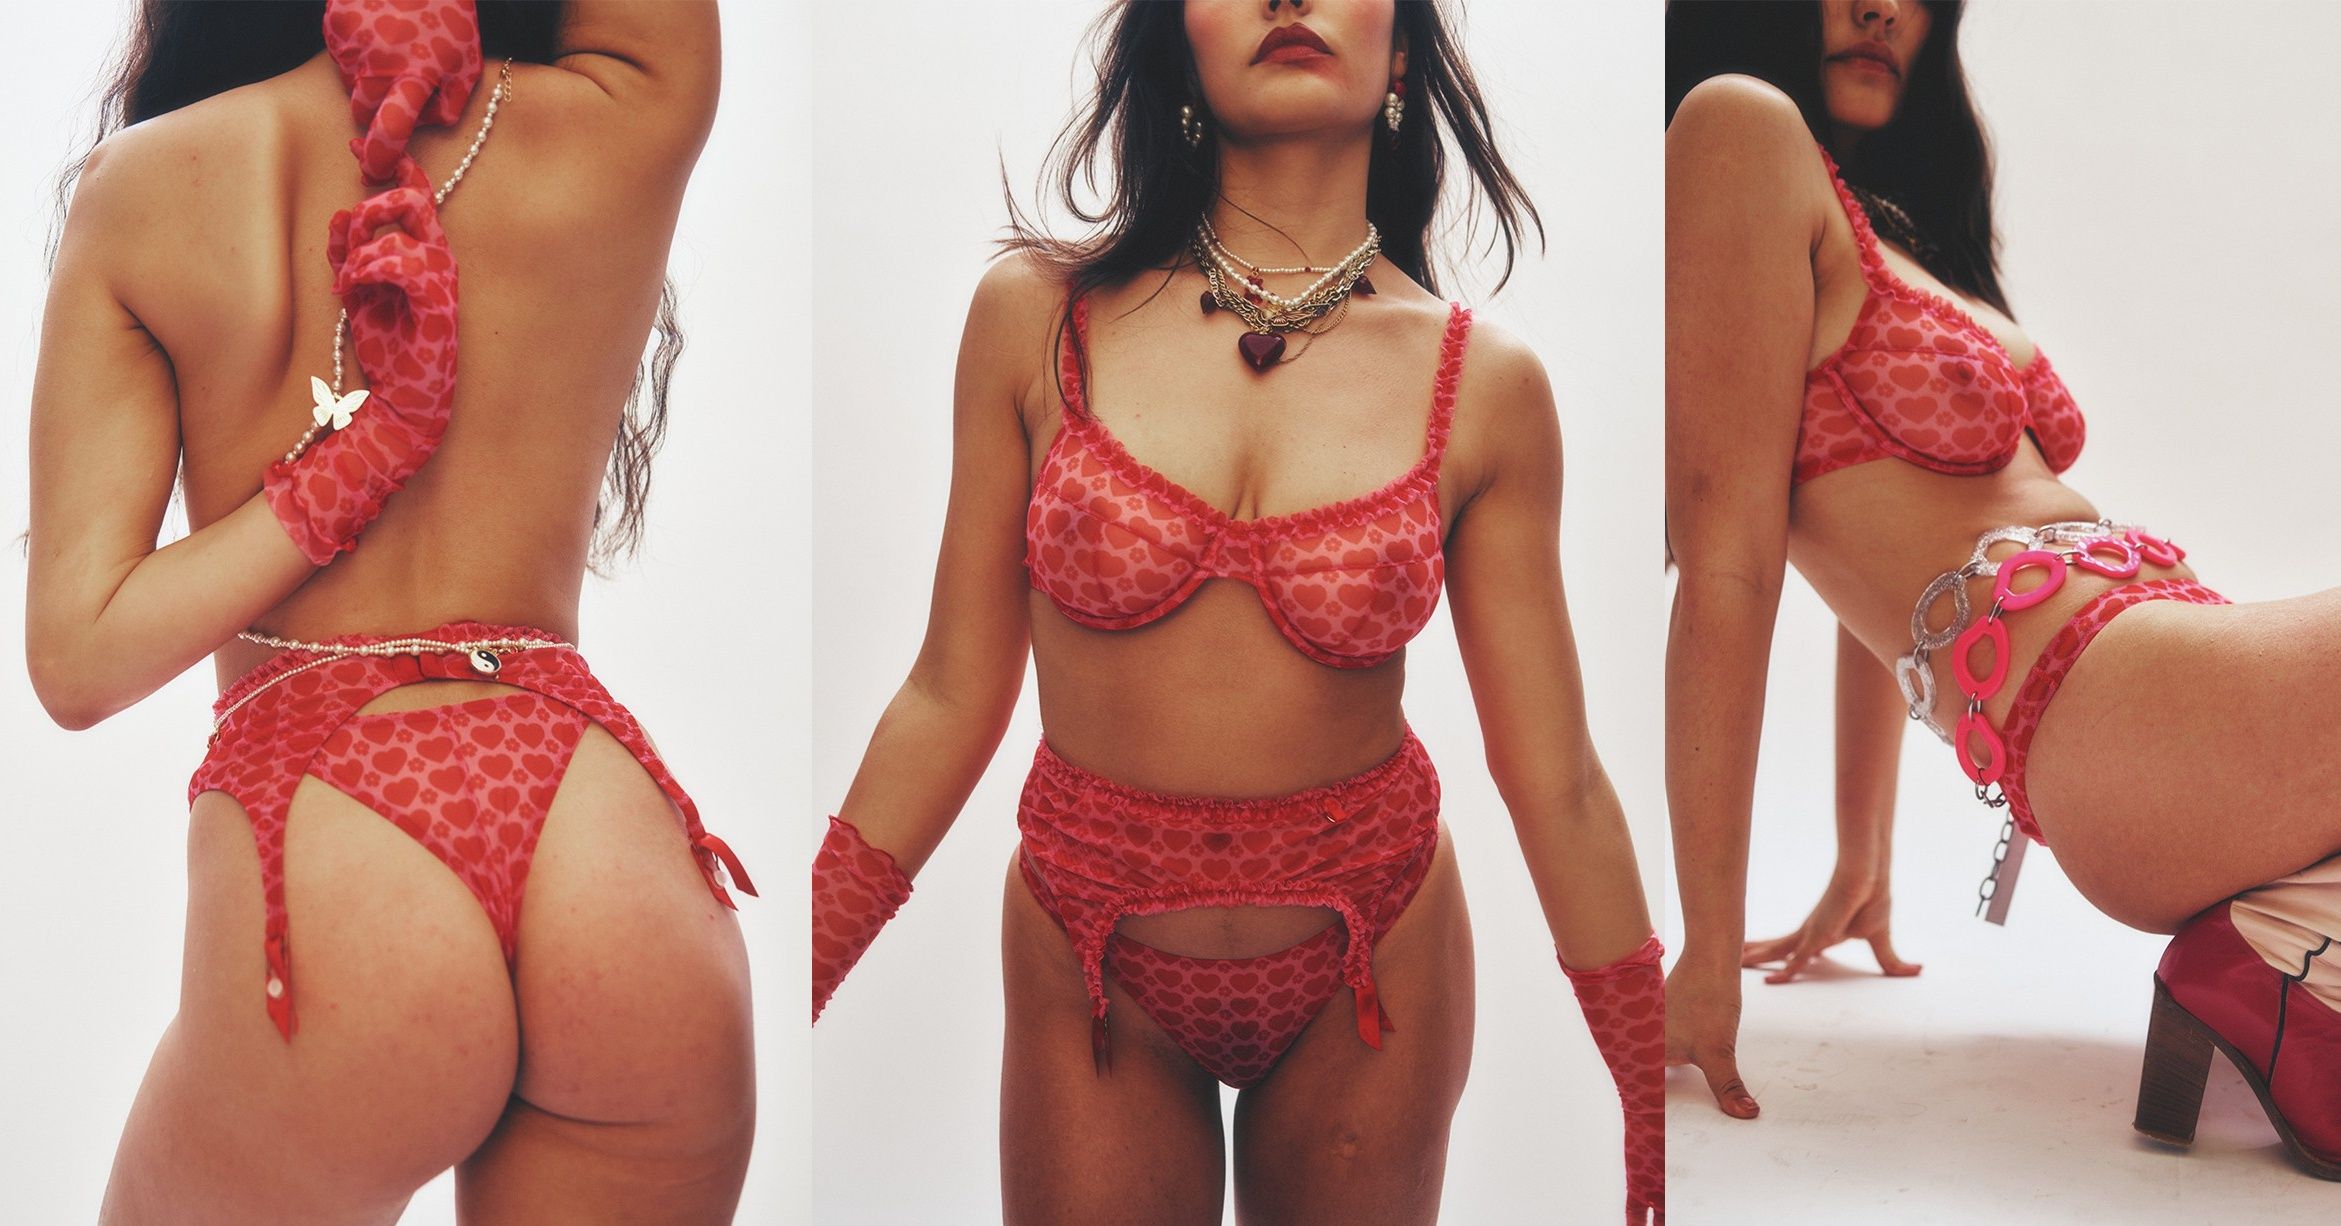 Valentine's Day Lingerie & Undies to Spice Up Your Night